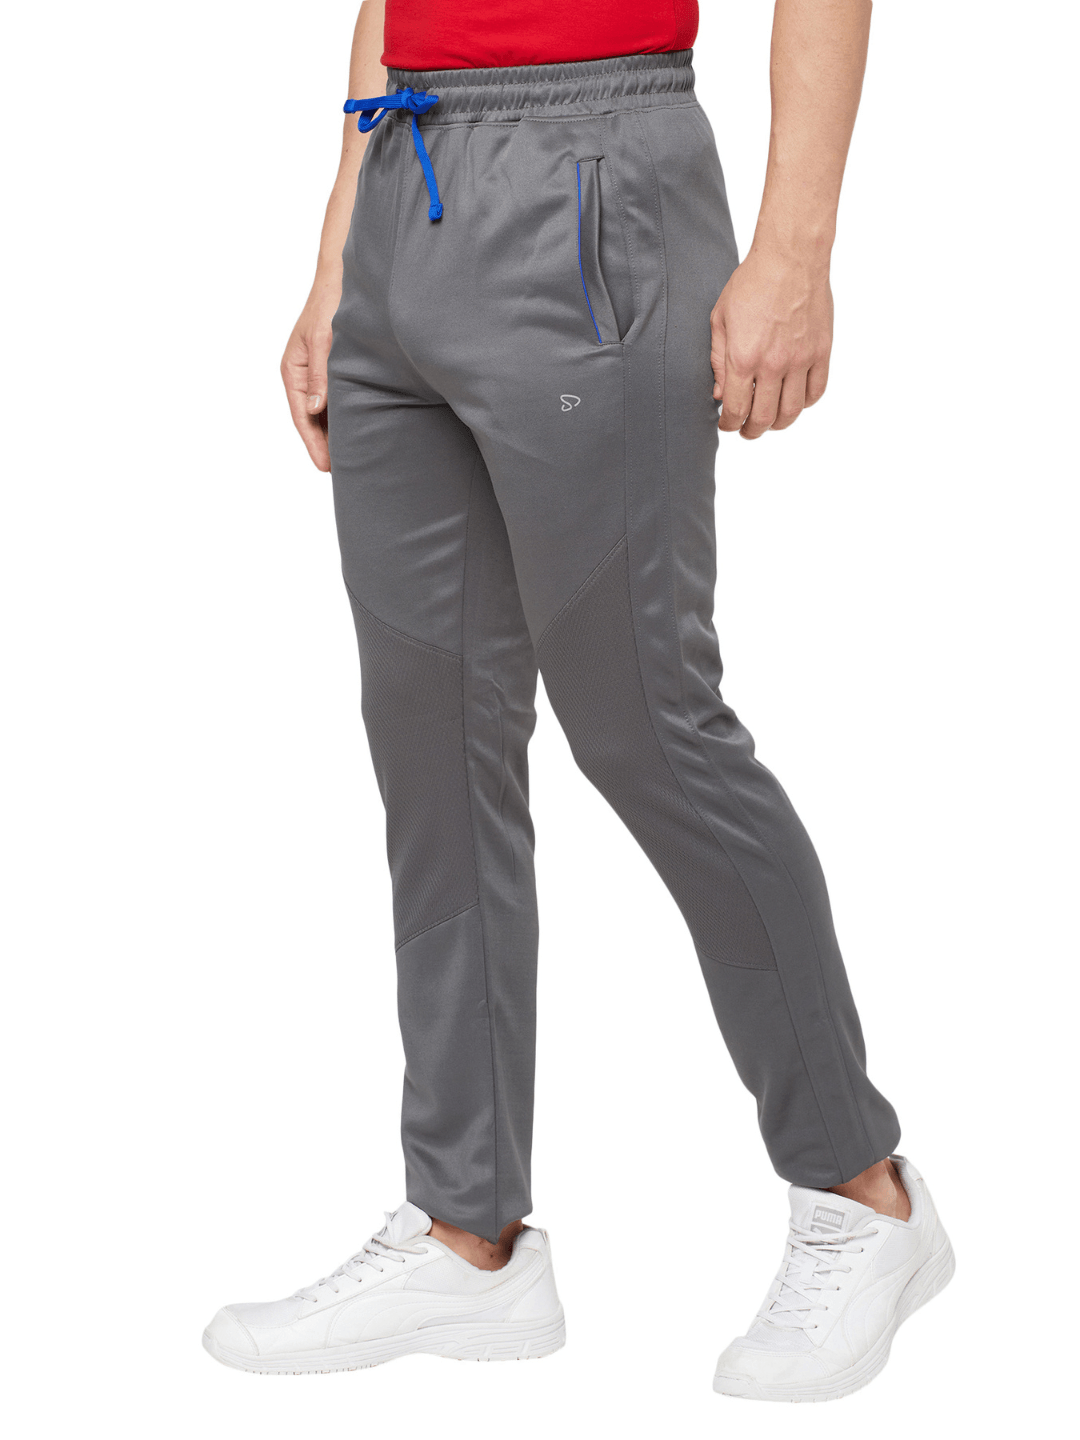 Macho Sporto Mens Track Pants 103  Online Shopping site in India